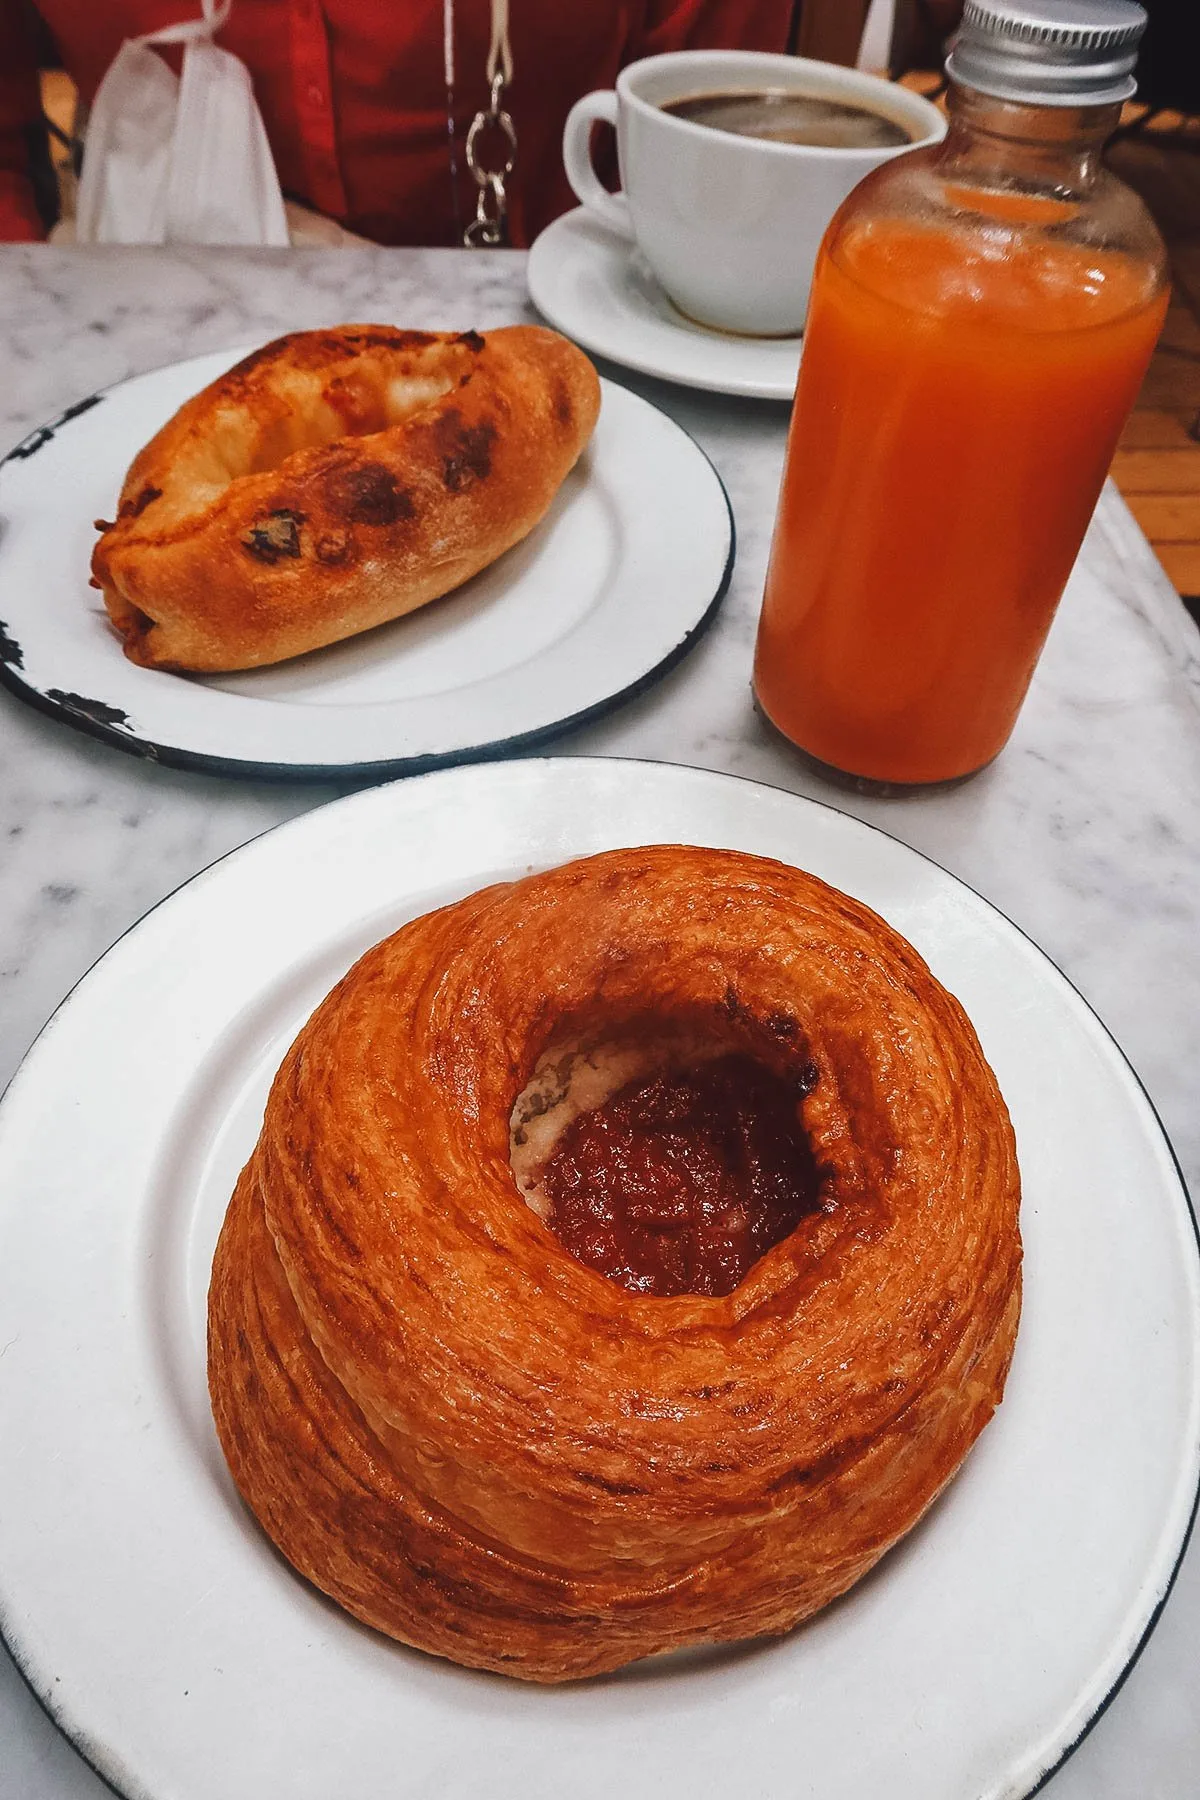 Pastries from Panaderia Rosetta restaurant in Mexico City